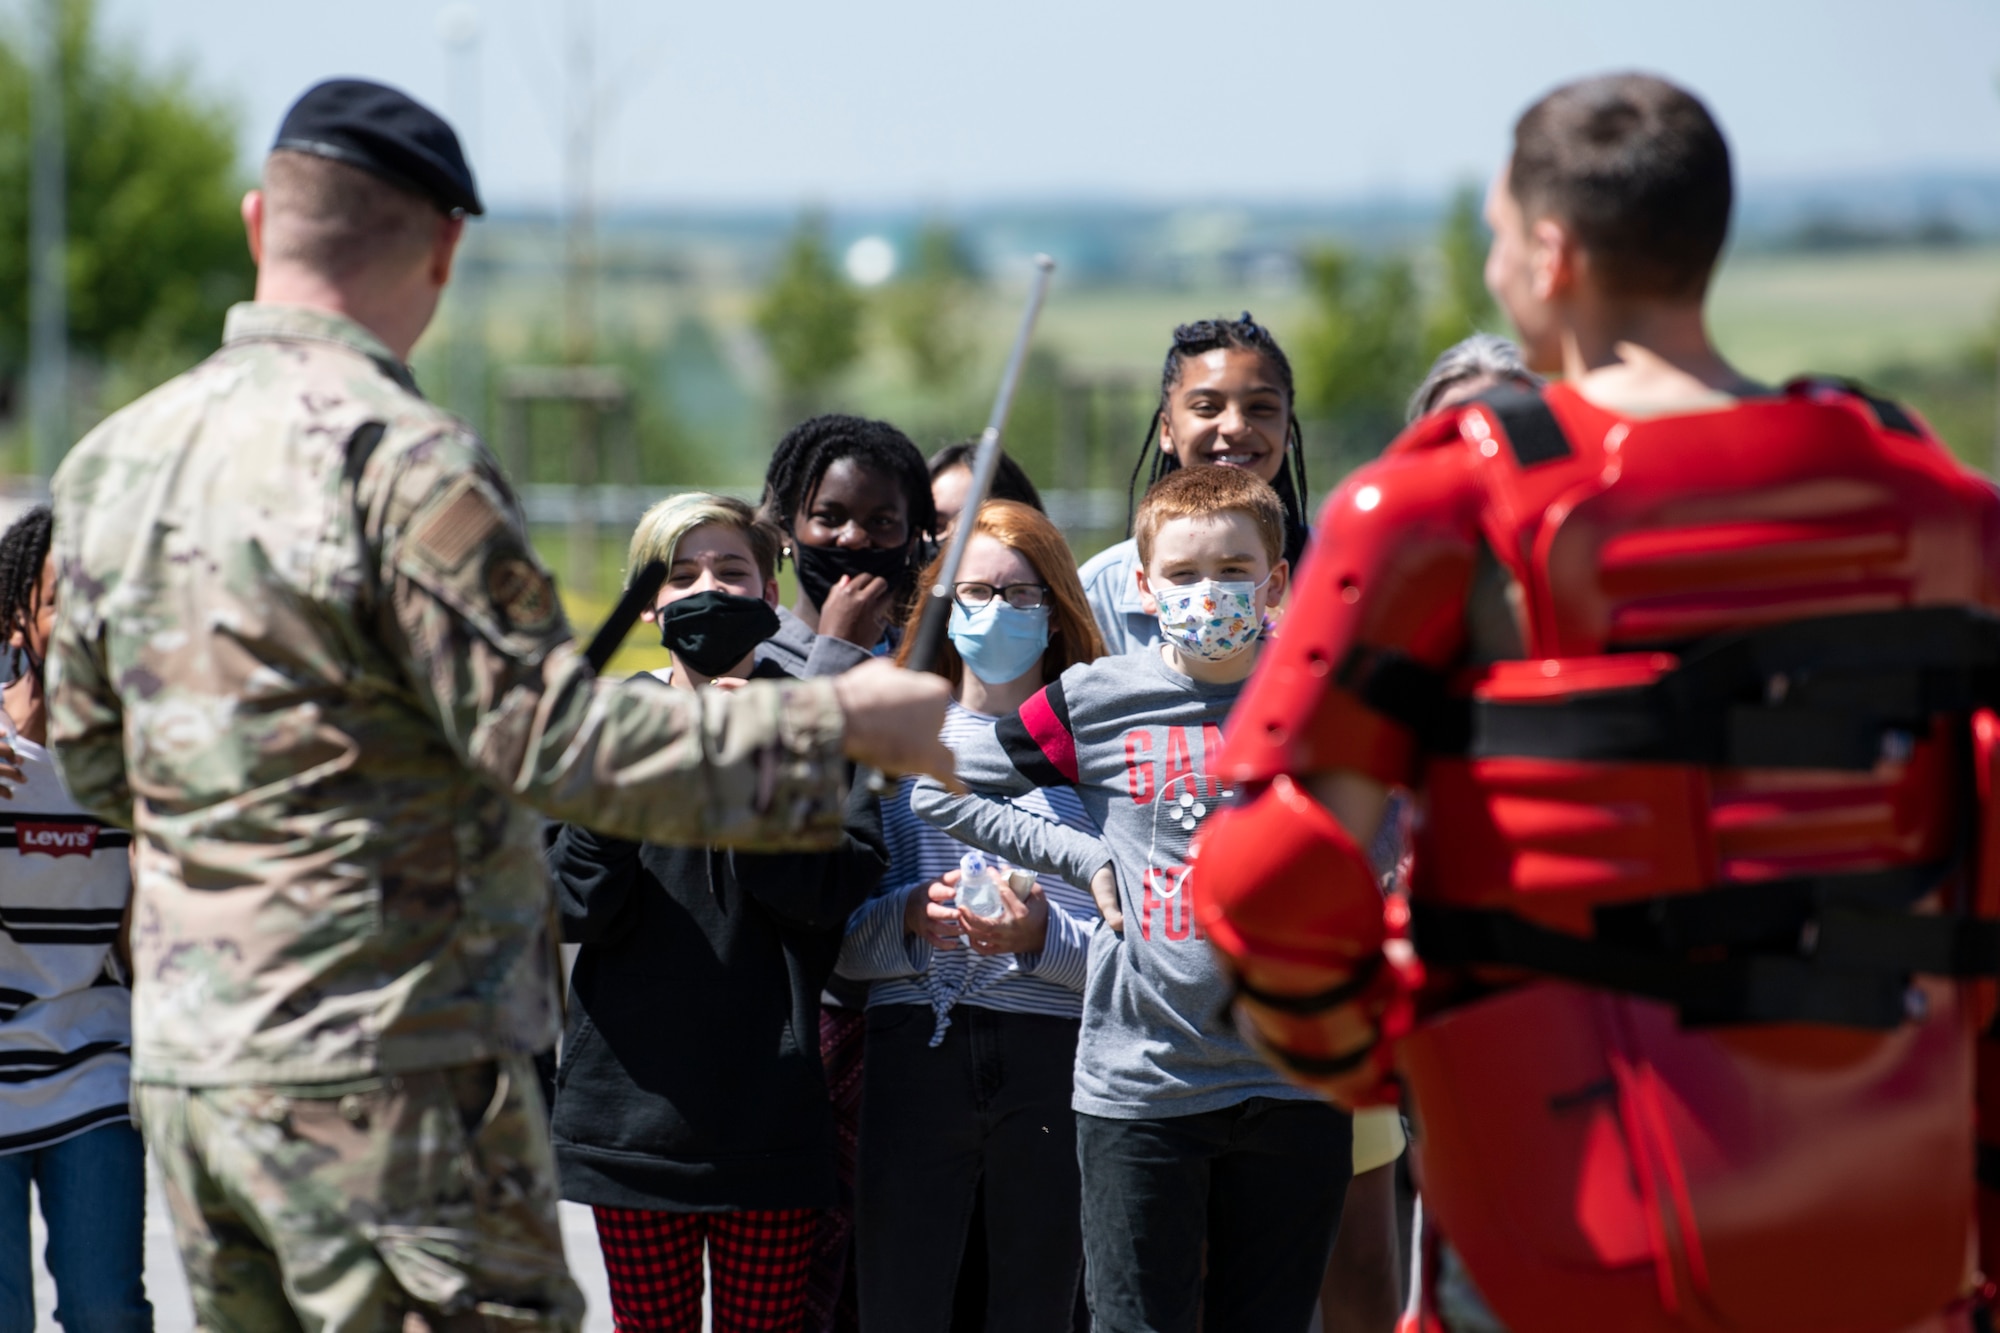 U.S. Air Force Airmen demonstrate advance baton techniques to onlookers.